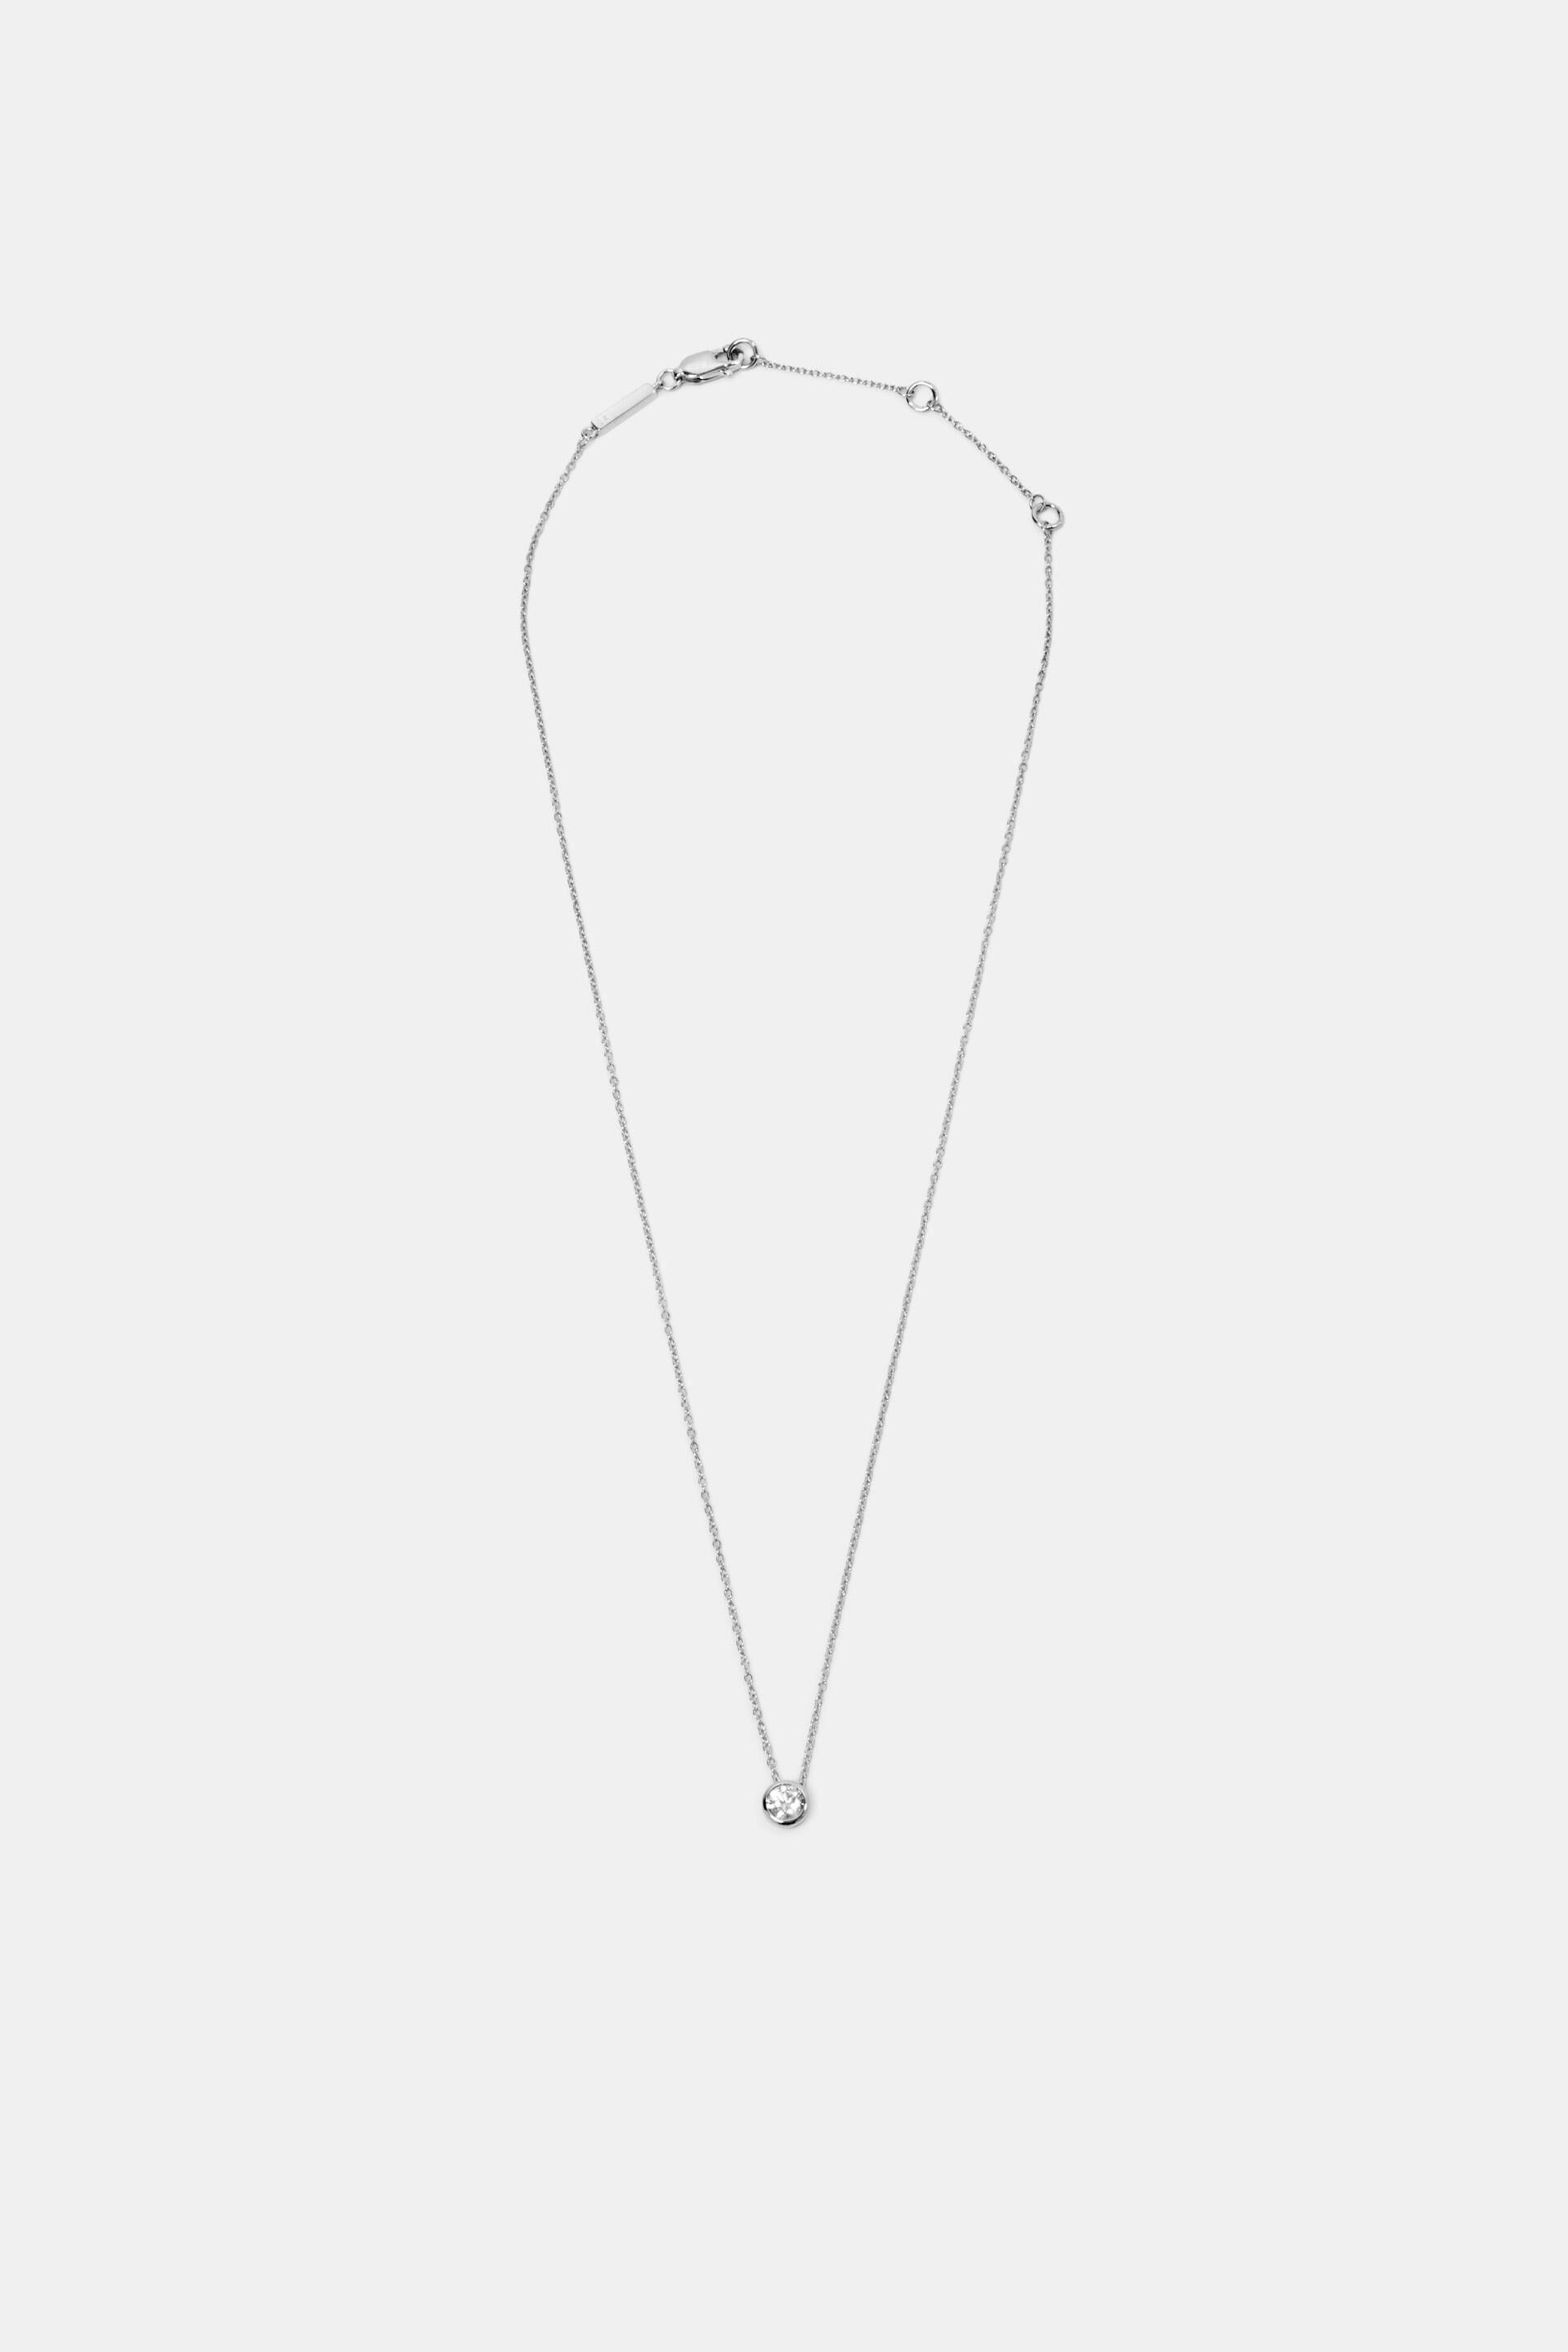 Esprit with silver Necklace sterling zirconia,